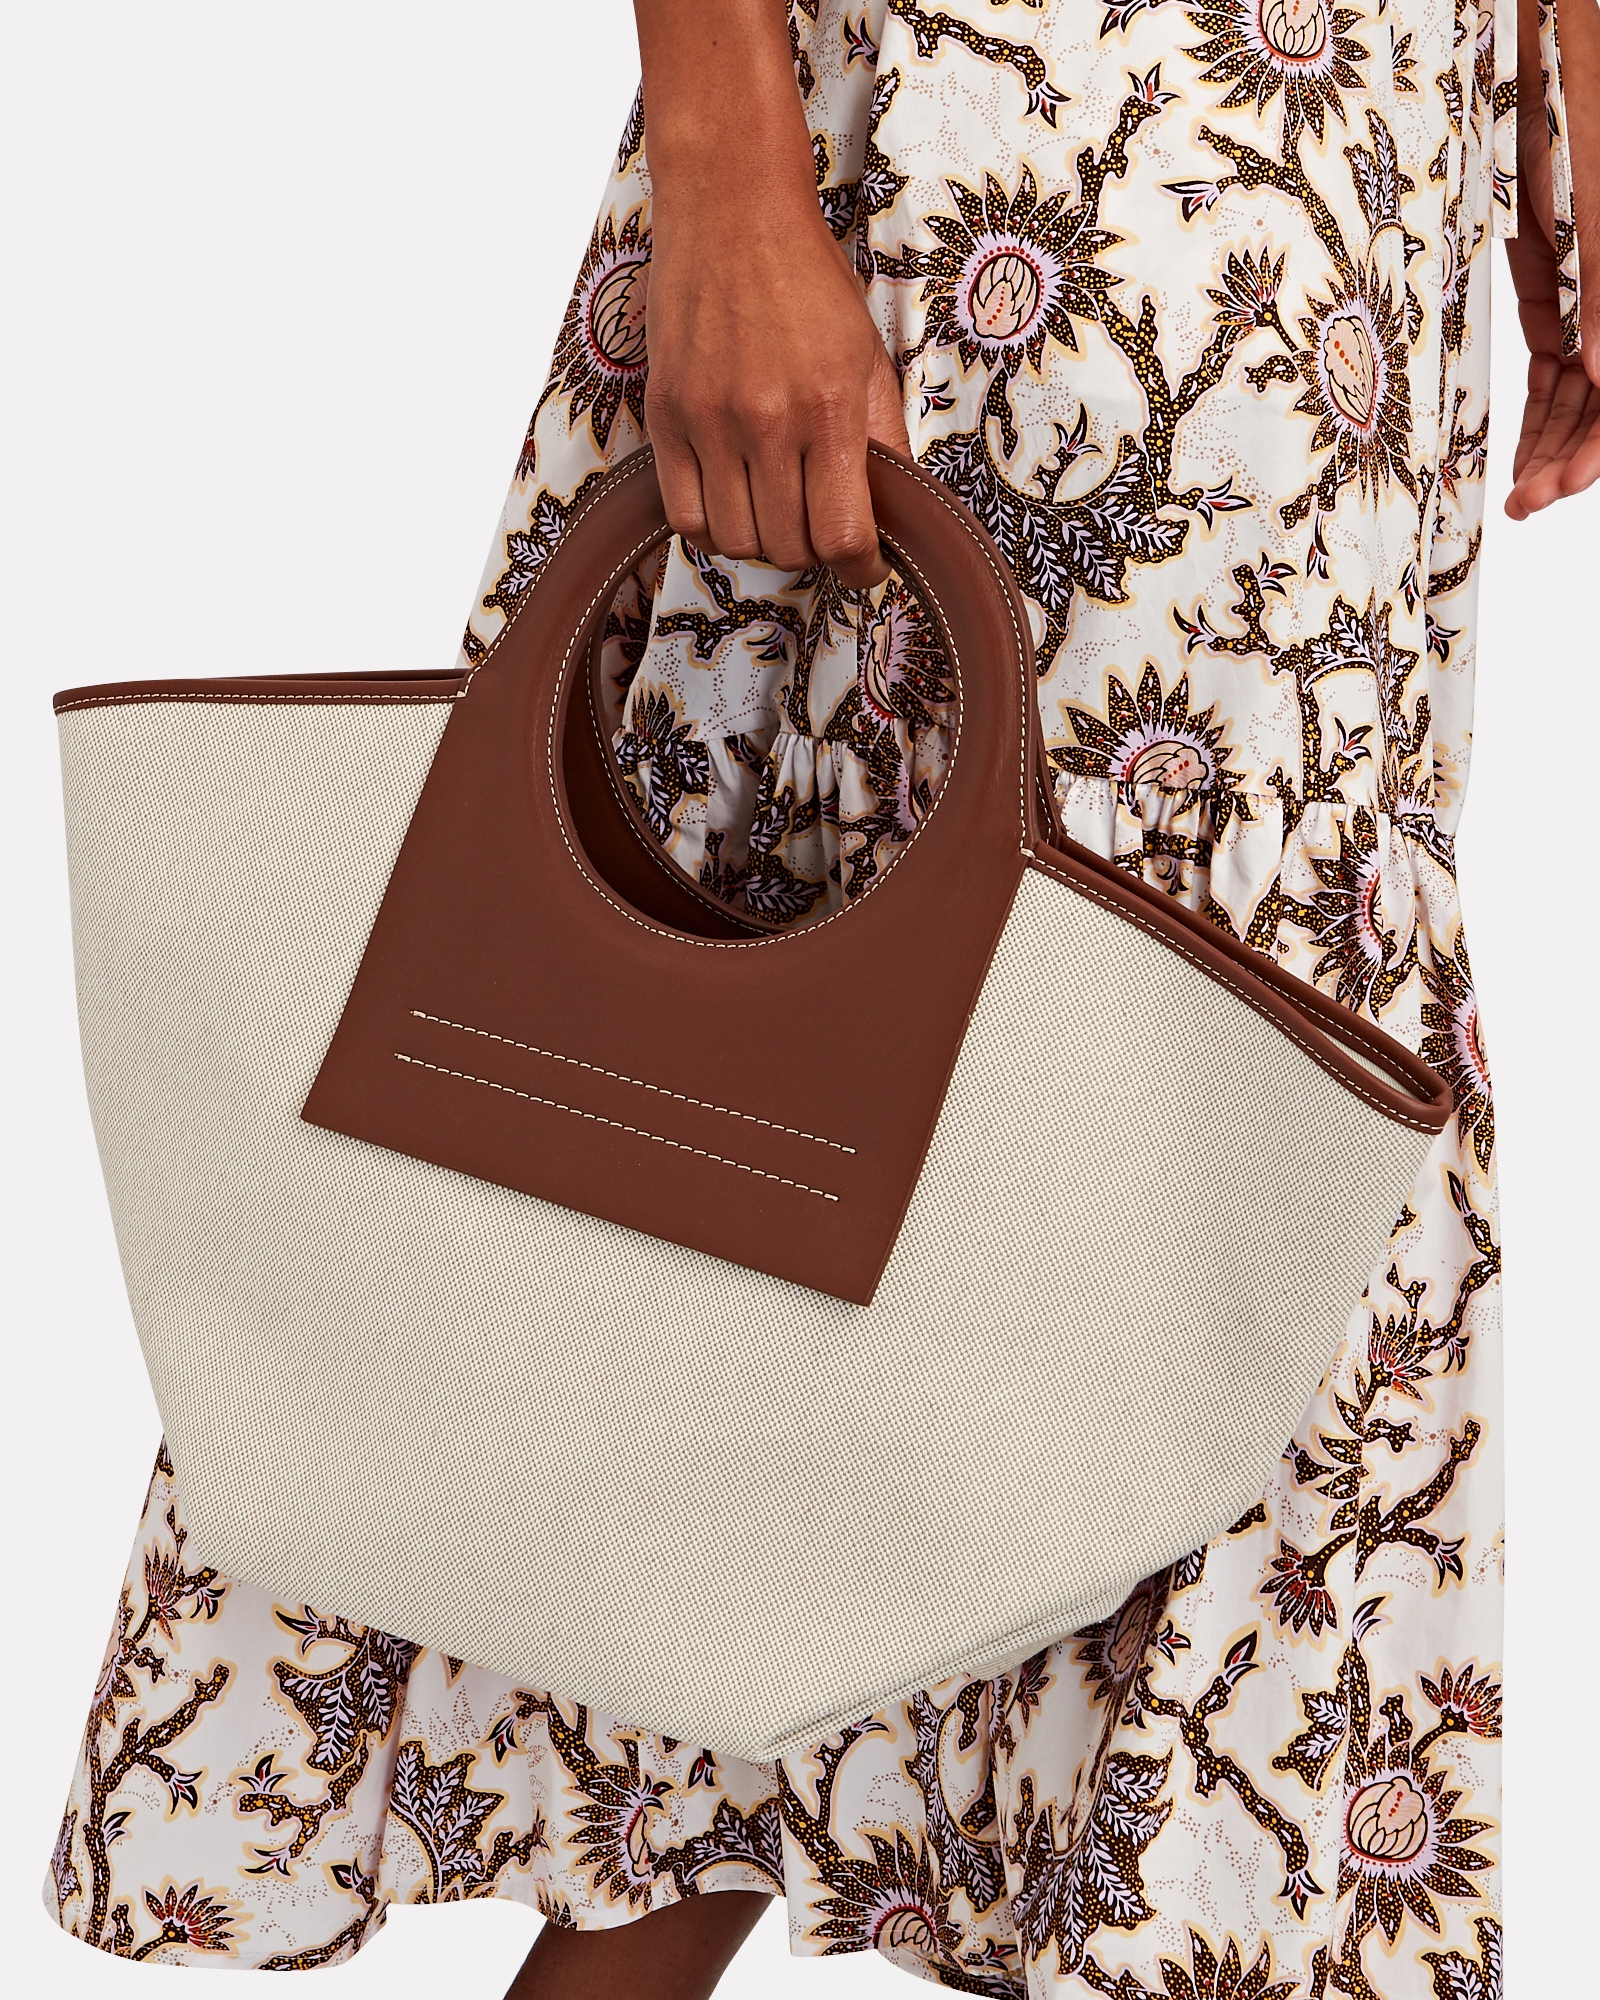 Cala Small Leather-Trimmed Canvas Tote